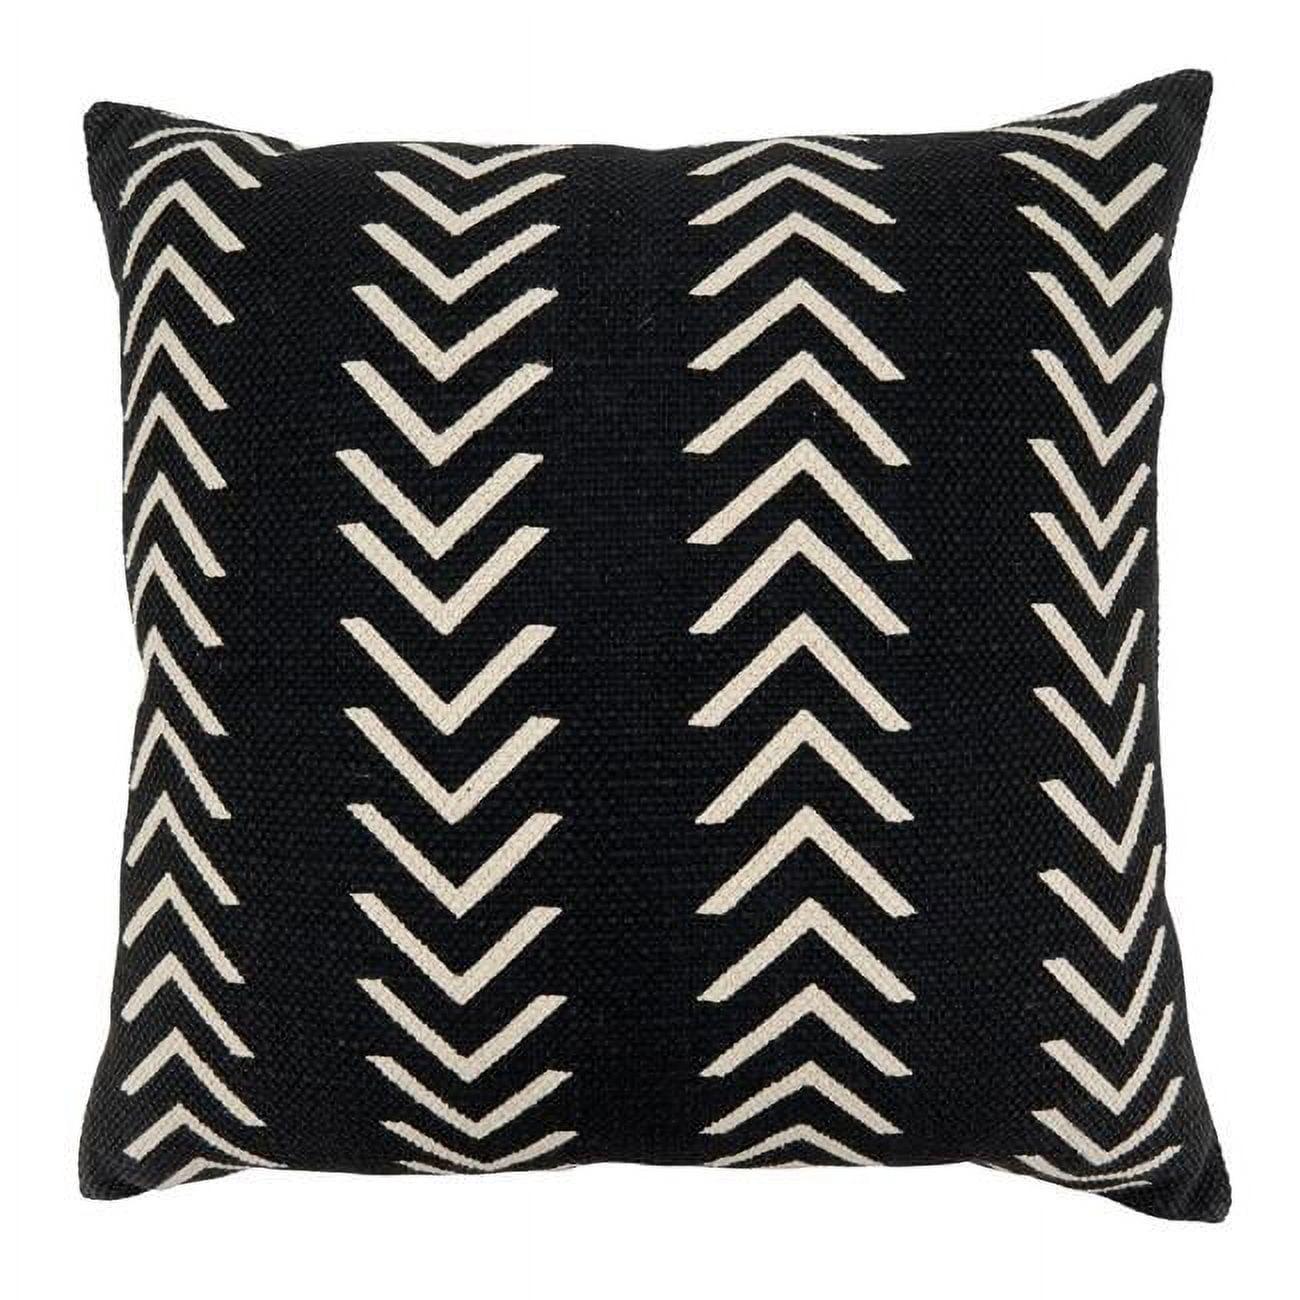 Chic Rustic Chevron Cotton 22" Throw Pillow Cover in Black